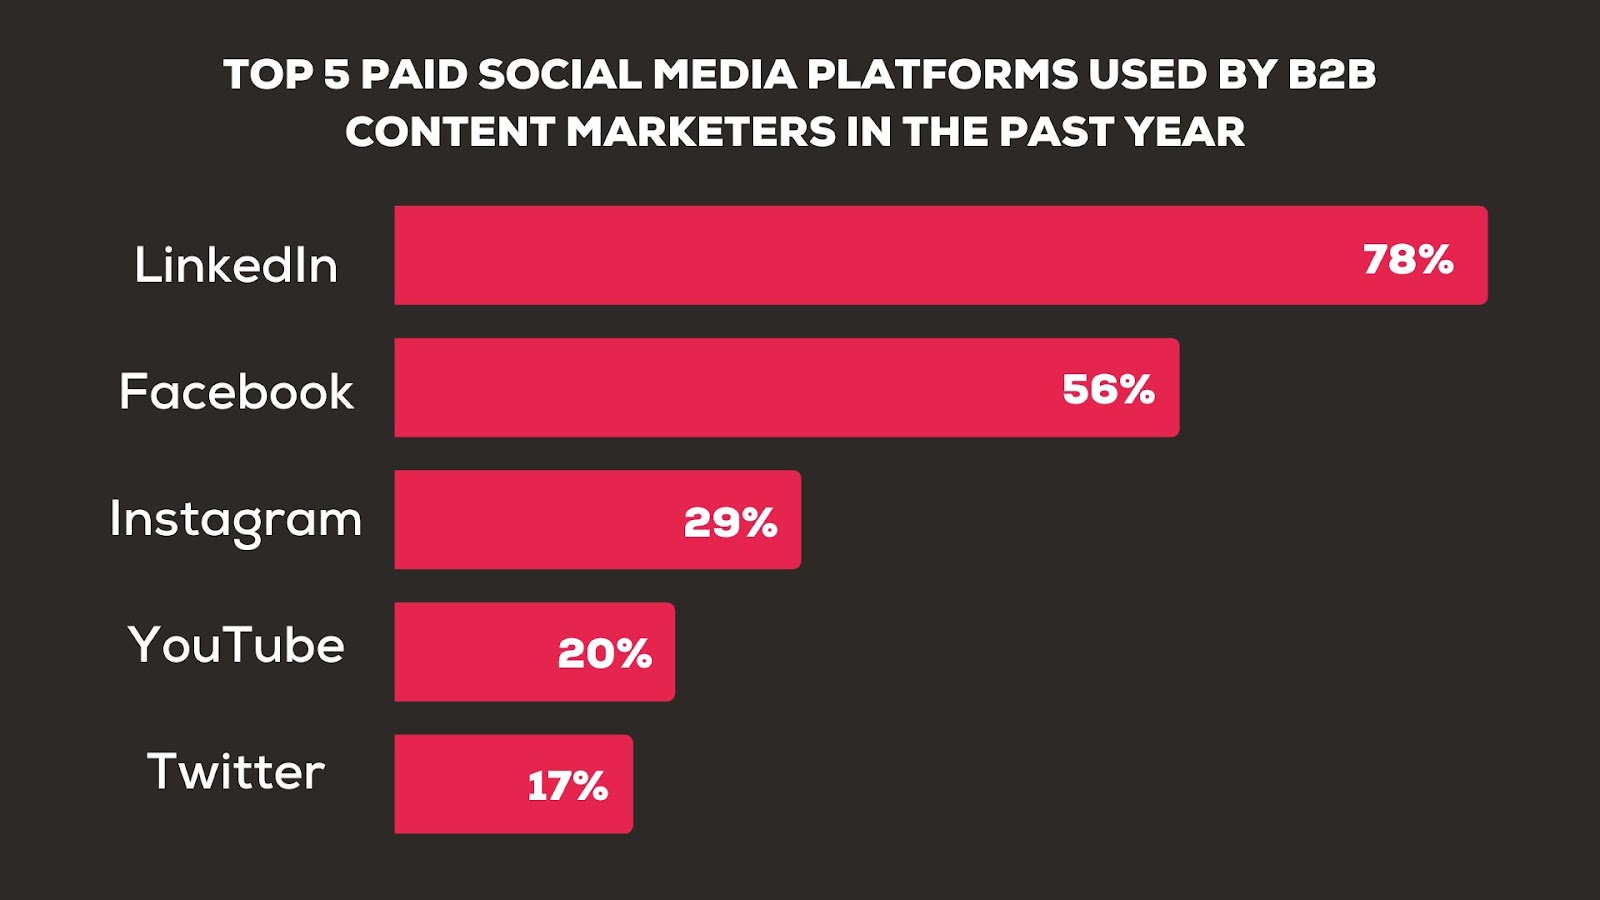 Top 5 paid social media platforms used by B2B content marketers in the past year 